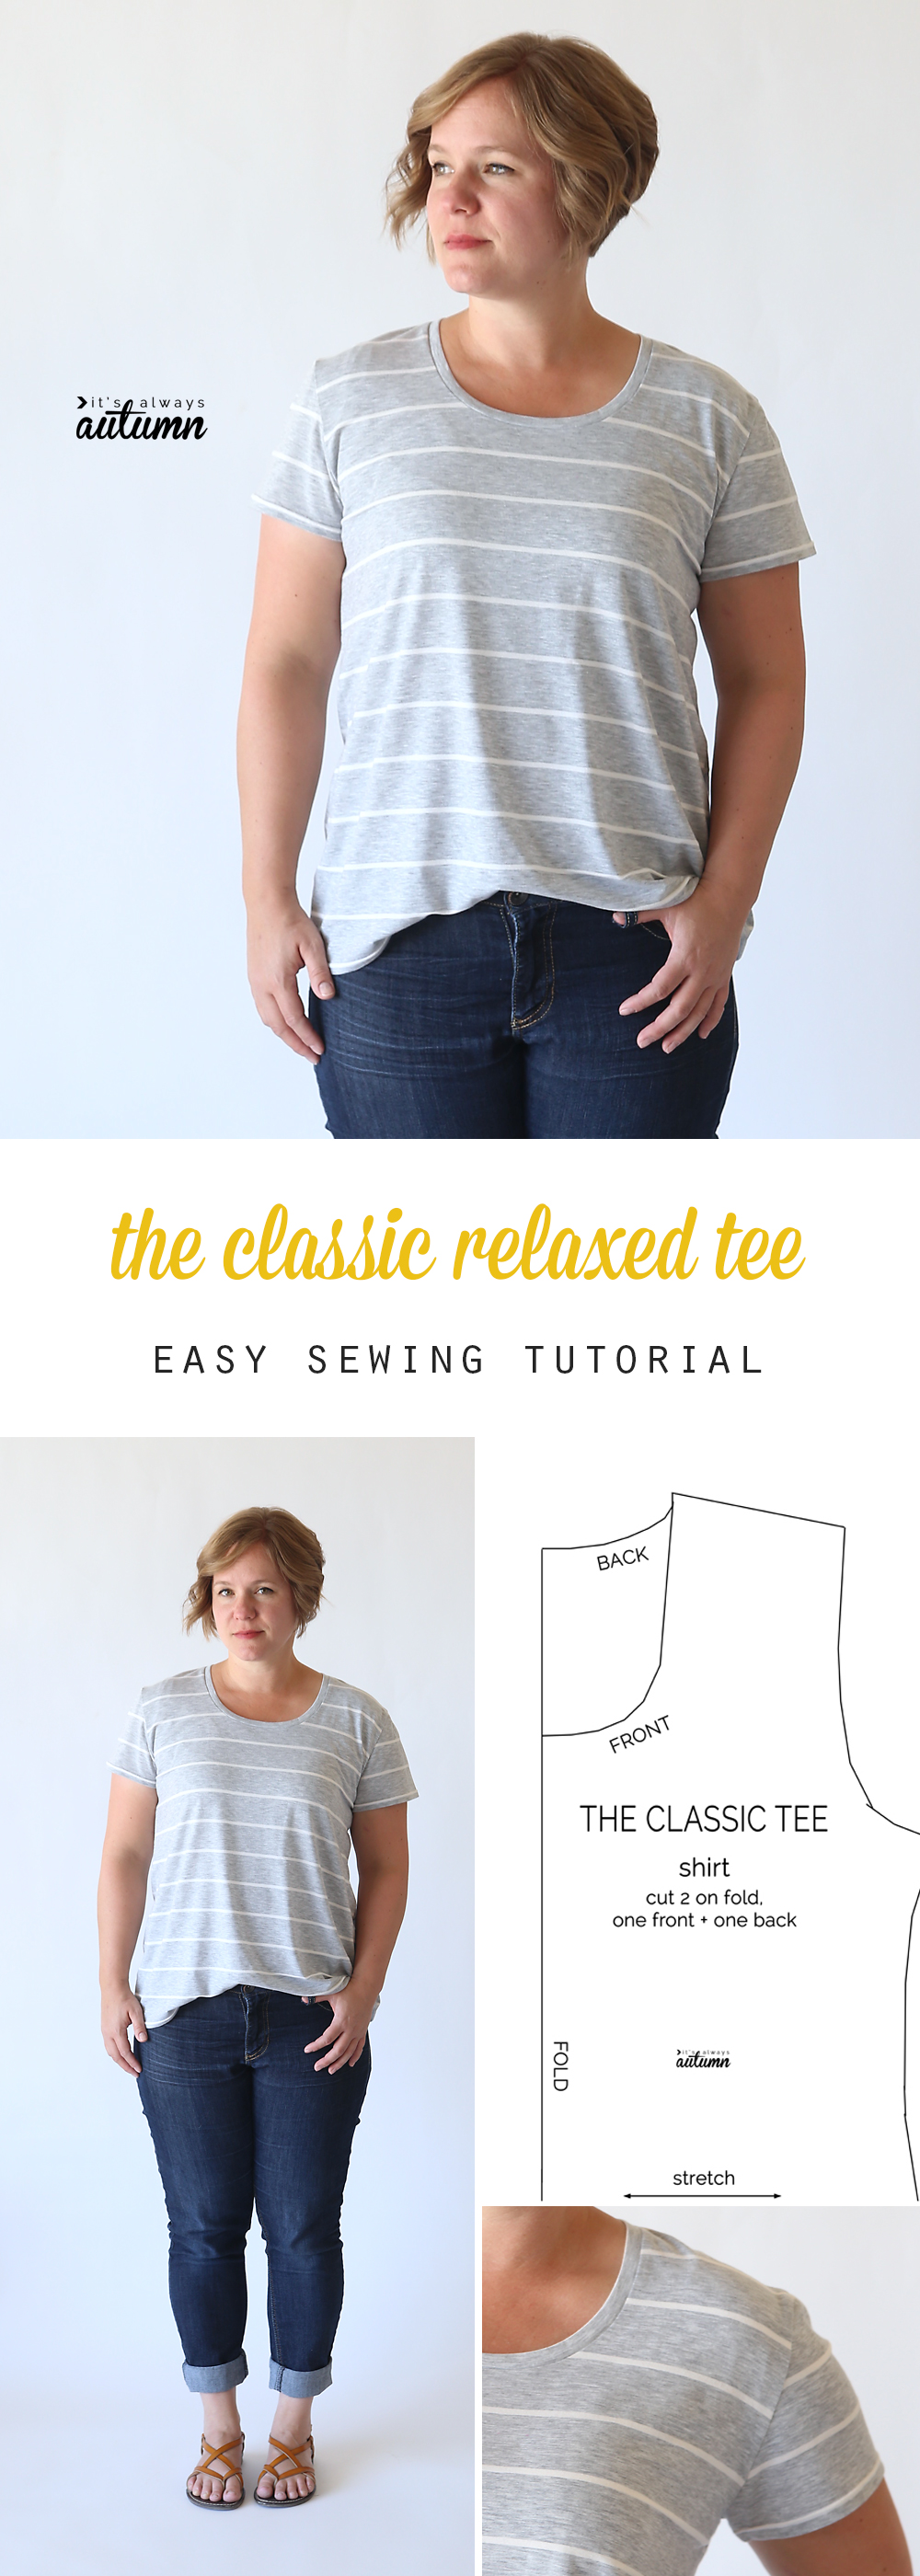 A woman wearing the classic tee in a relaxed fit; classic tee sewing pattern